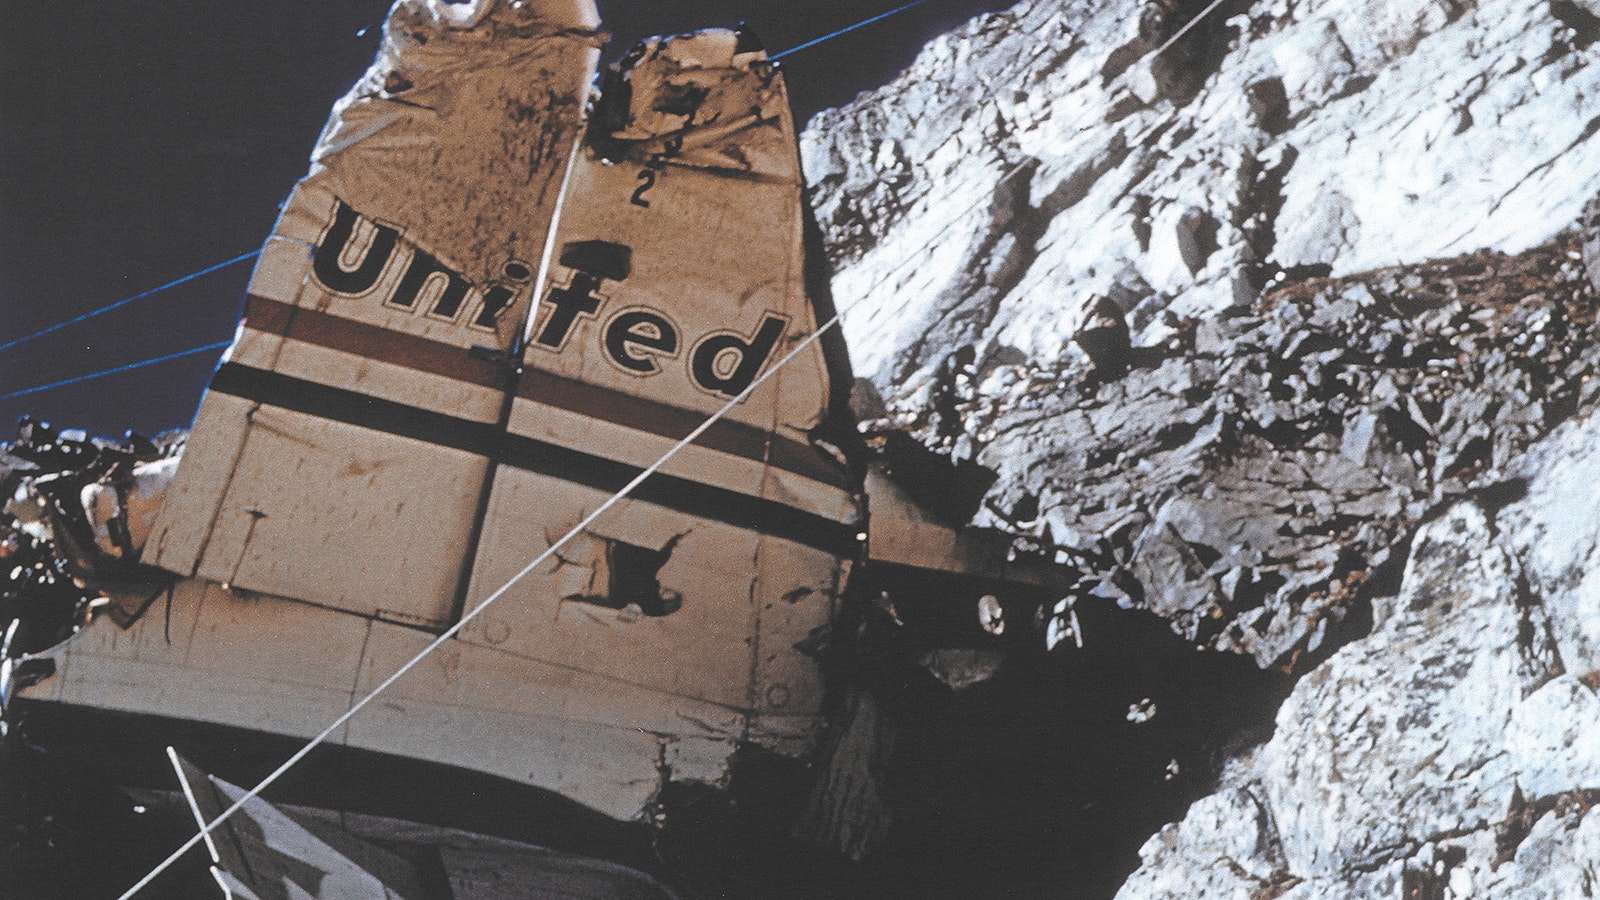 This photo of the United Airlines Flight 409 tail section on Medicine Bow  Peak was taken by Robert Harrower with a camera he found at the crash site.